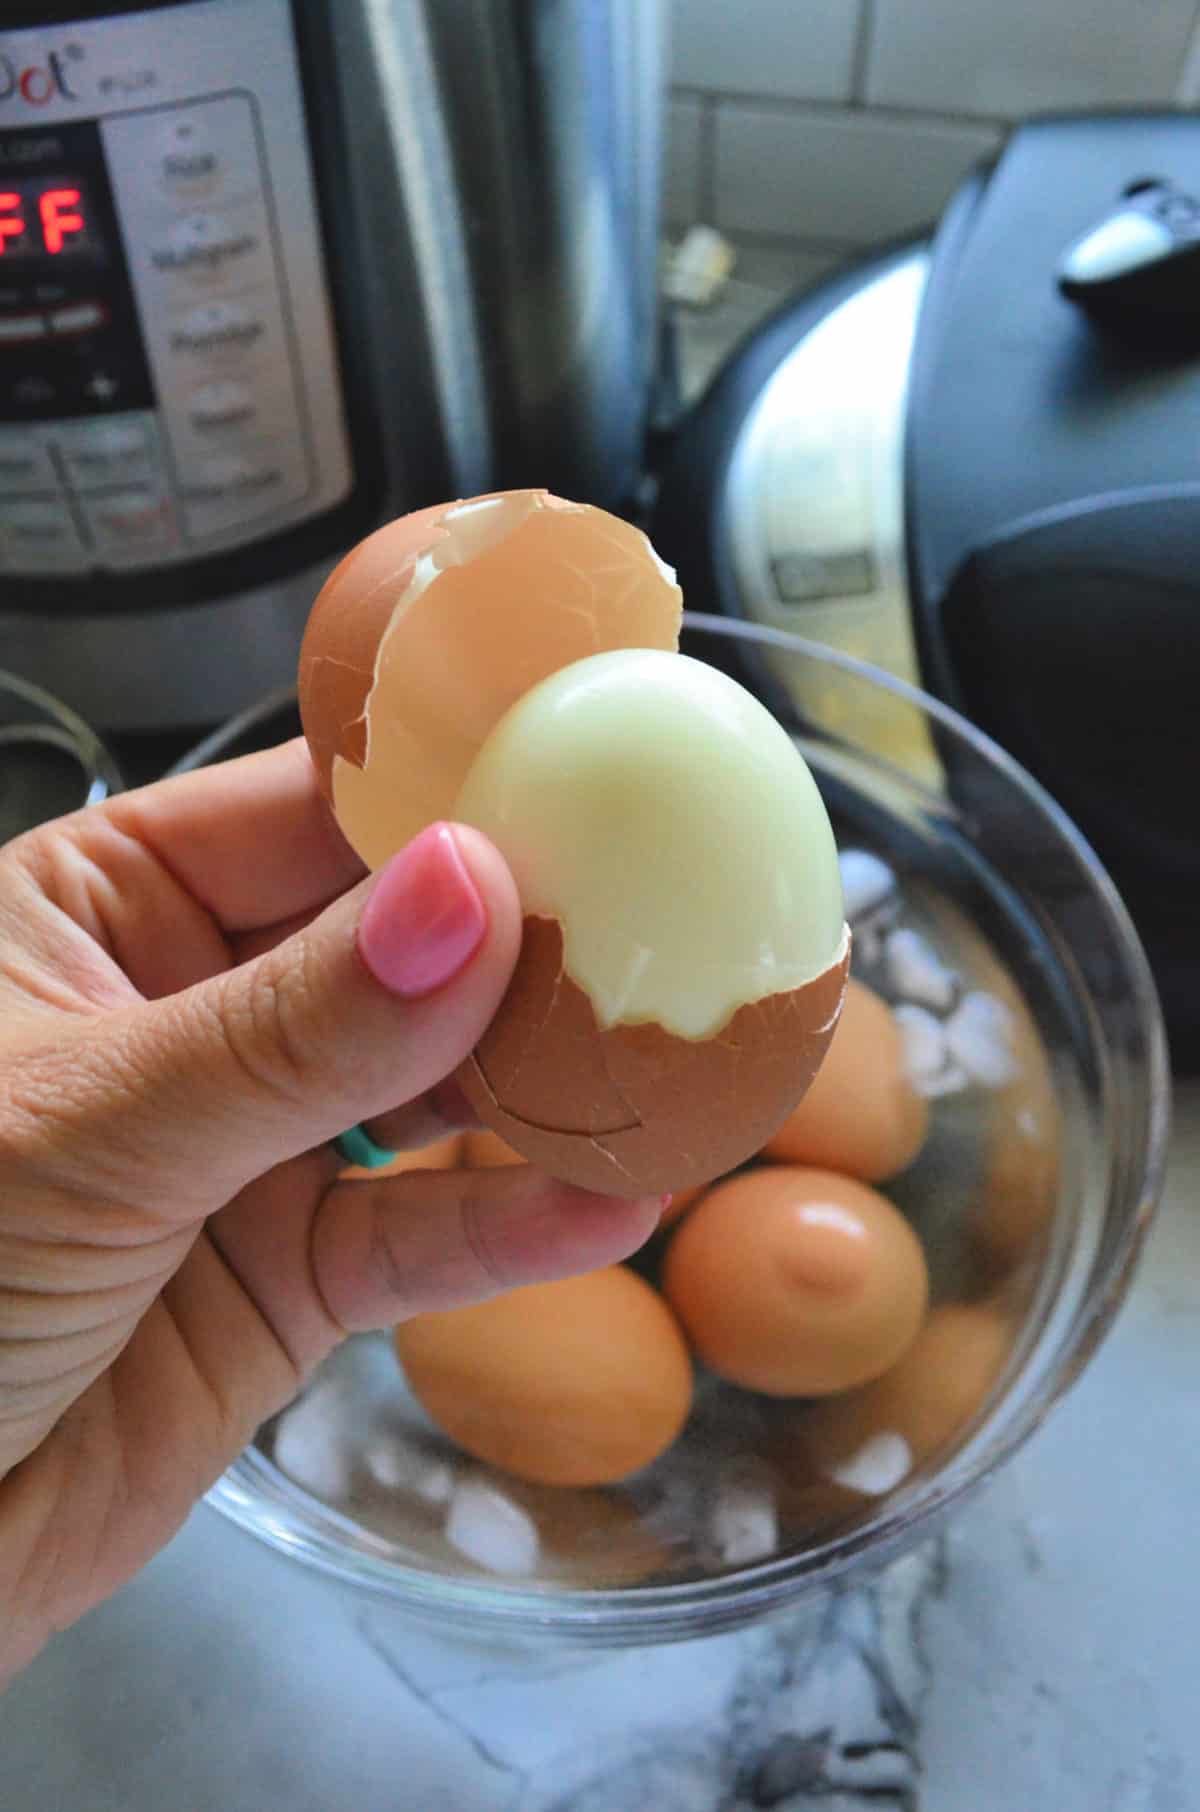 Hand holding up hard boiled egg with top portion of shell removed in front of instant pot.